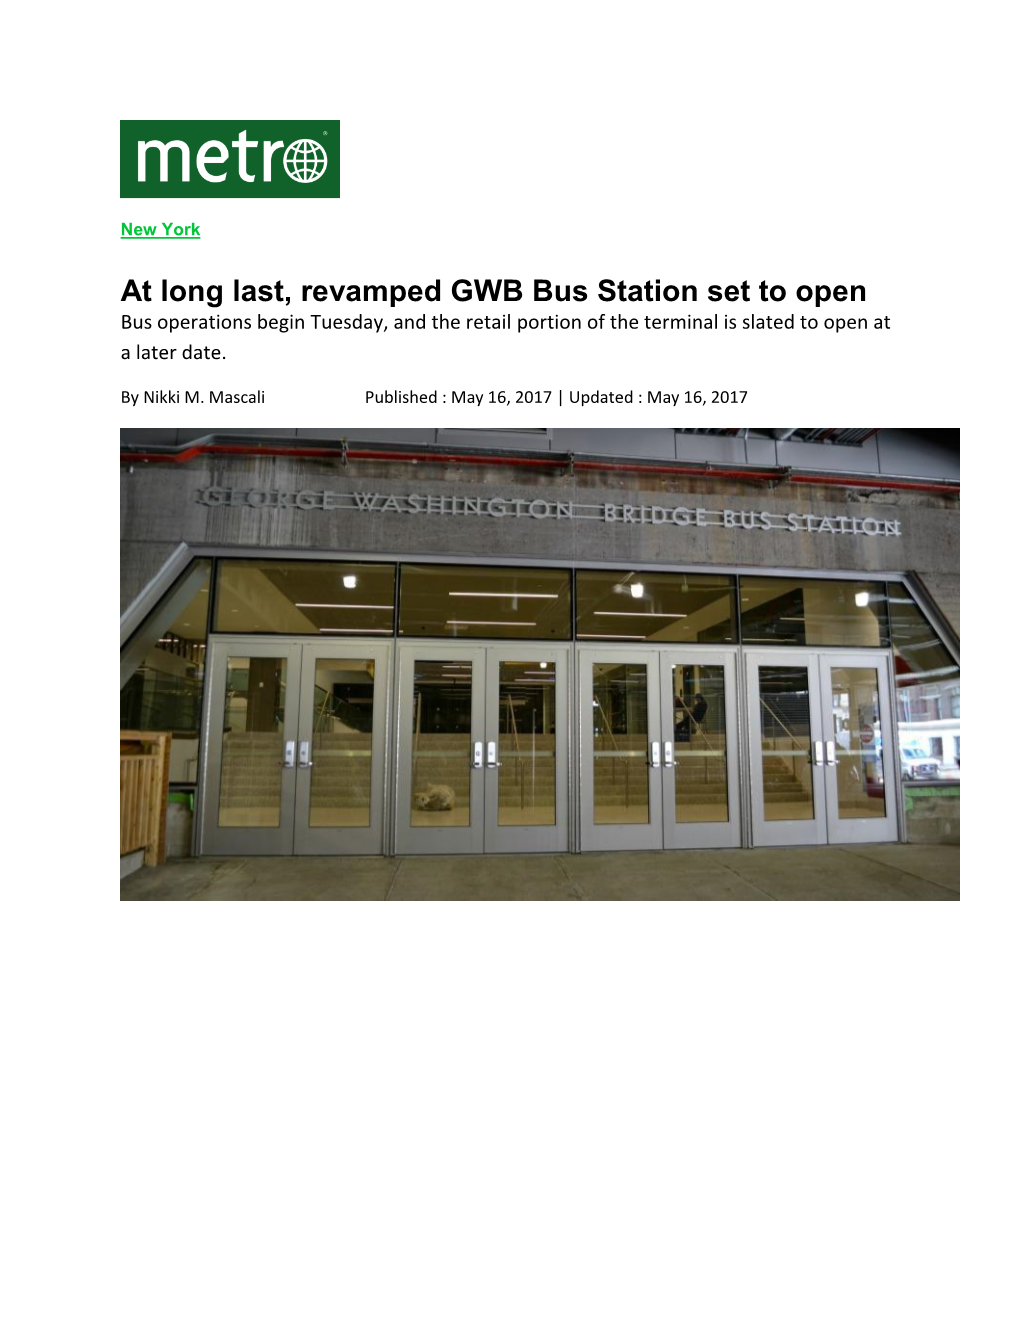 At Long Last, Revamped GWB Bus Station Set to Open (Metro)